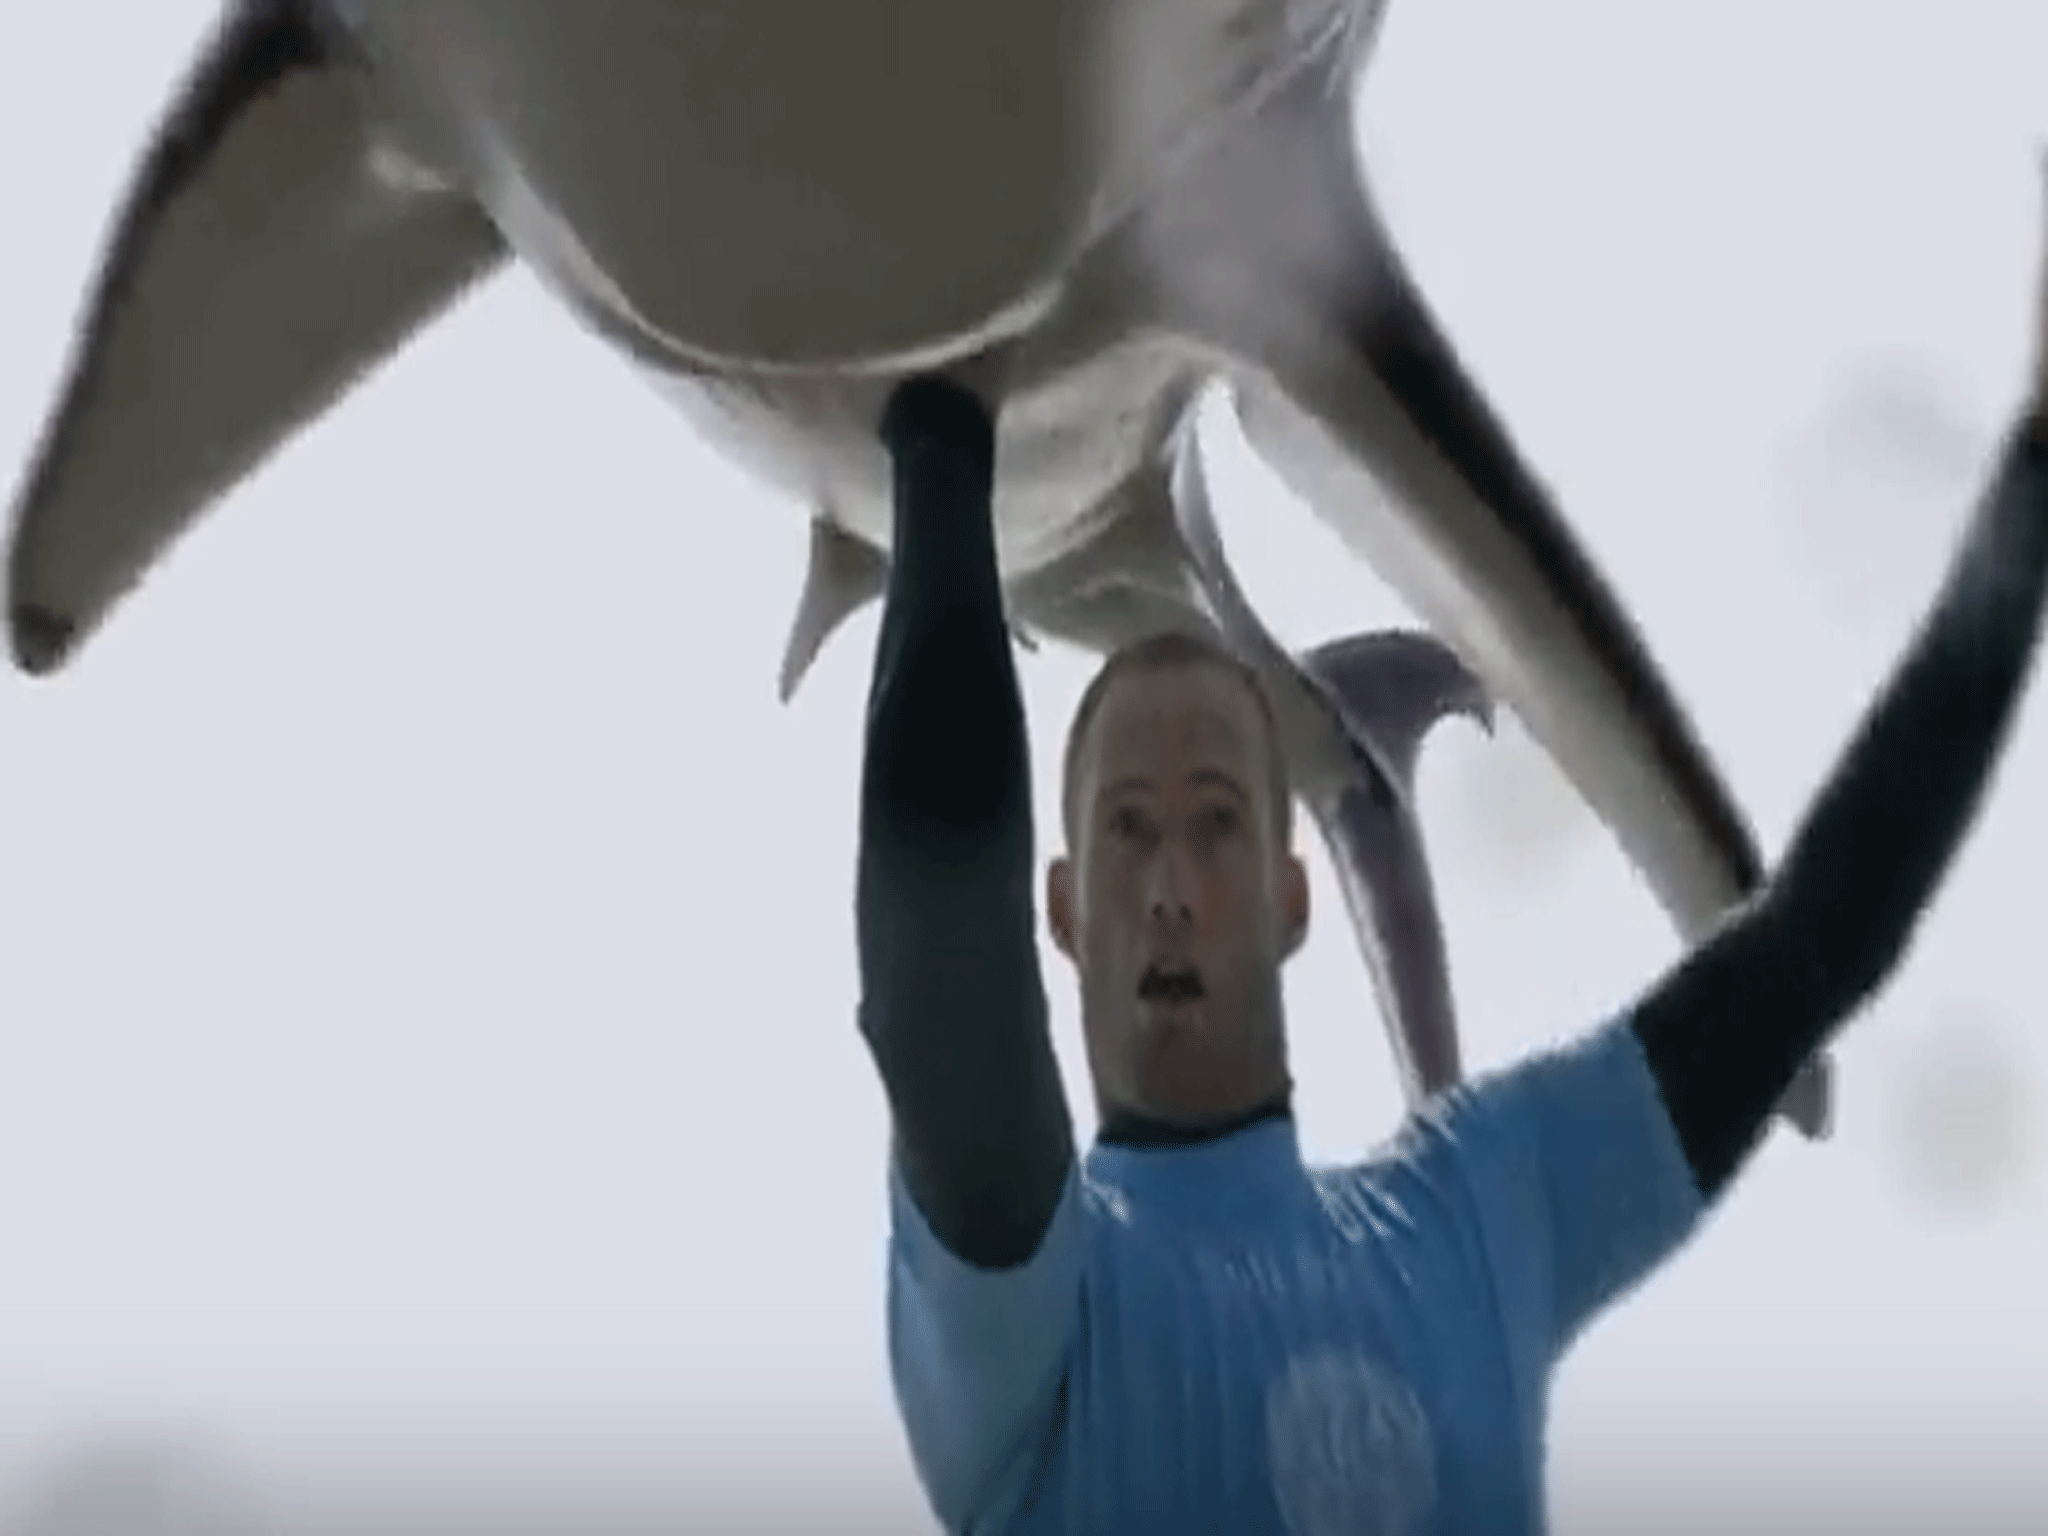 The Mike Fanning lookalike holds the computer-generated shark aloft as he rides a wave